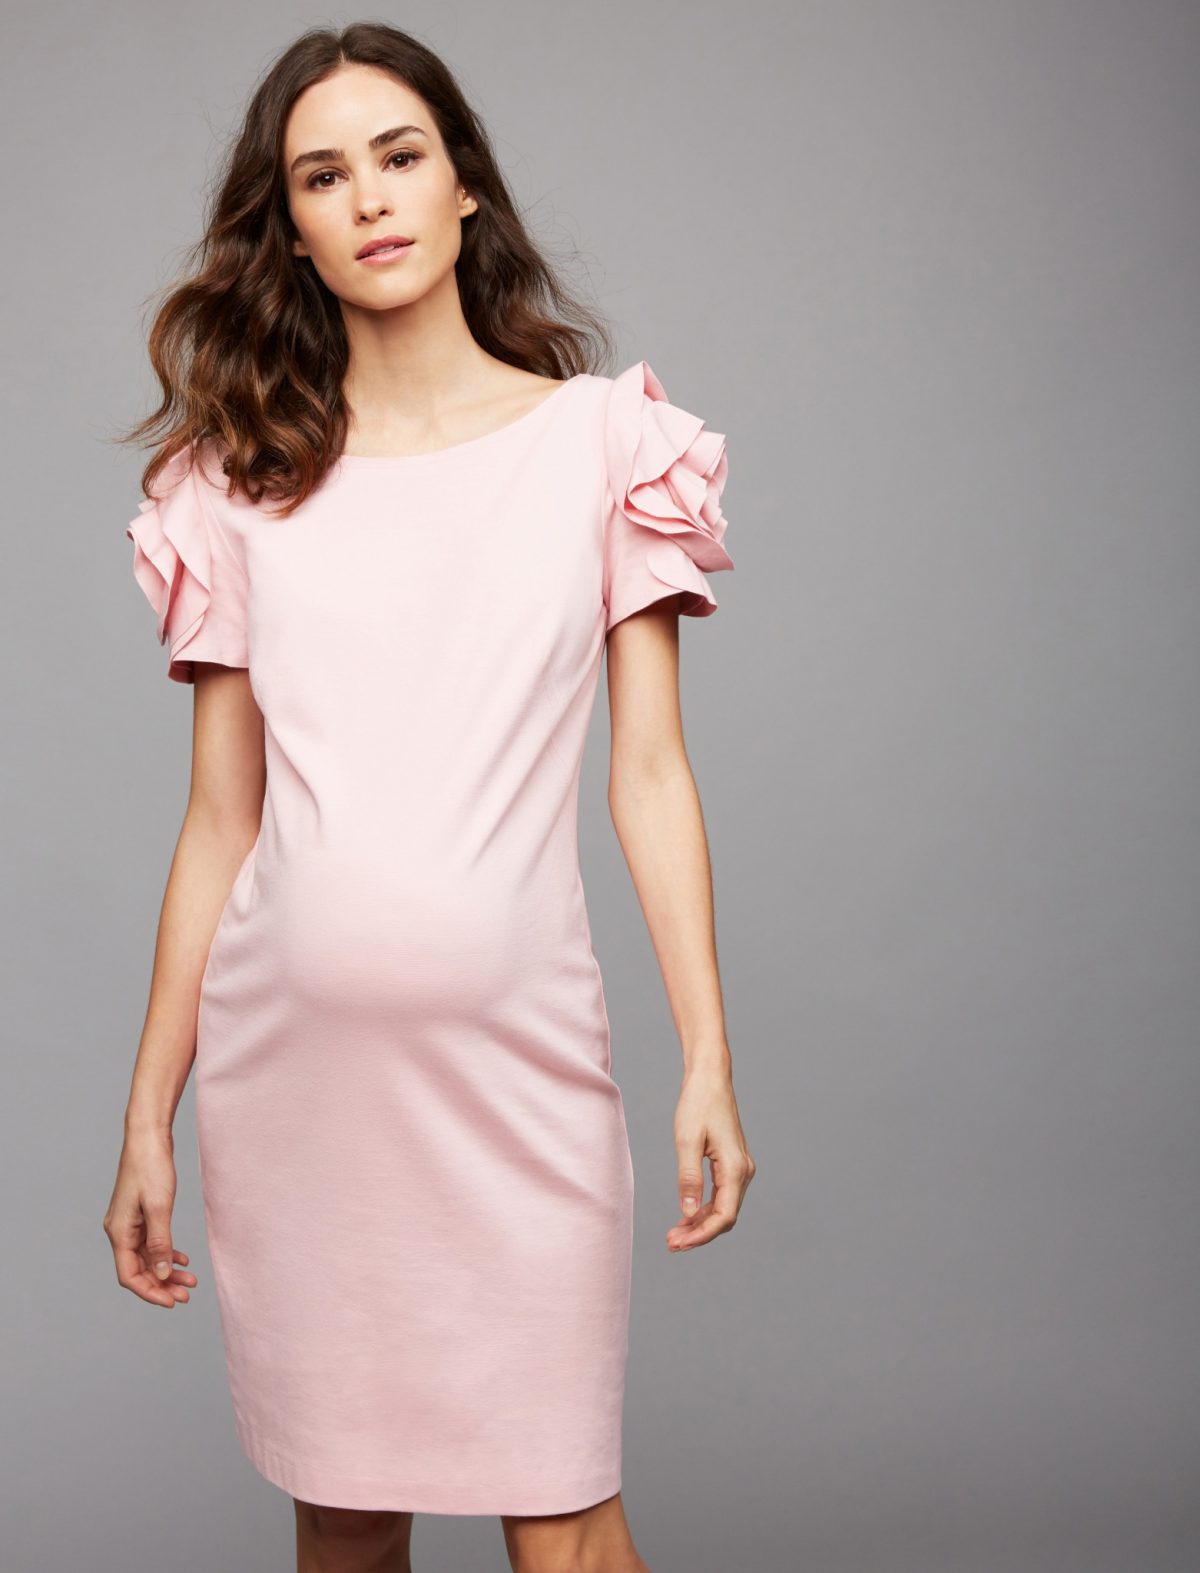 A Pea In The Pod: Best Maternity Brands